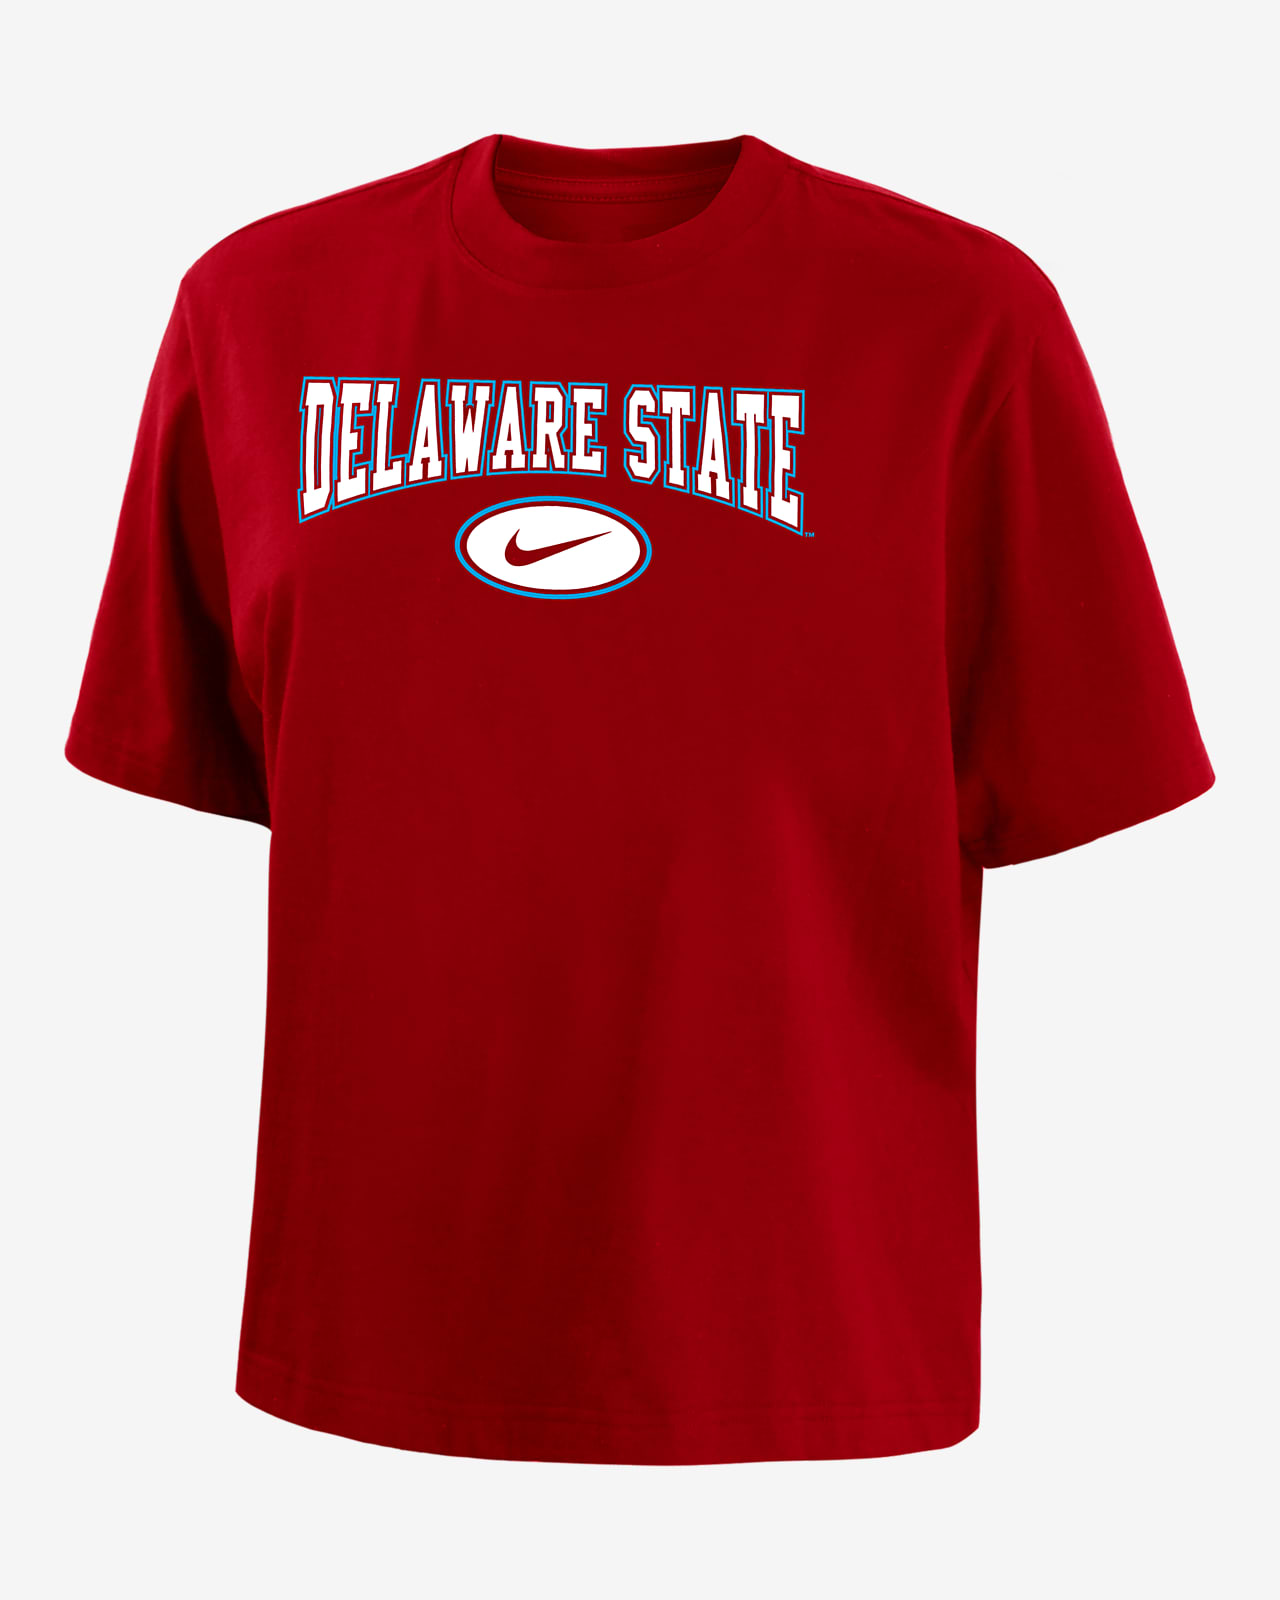 Delaware State Women's Nike College Boxy T-Shirt